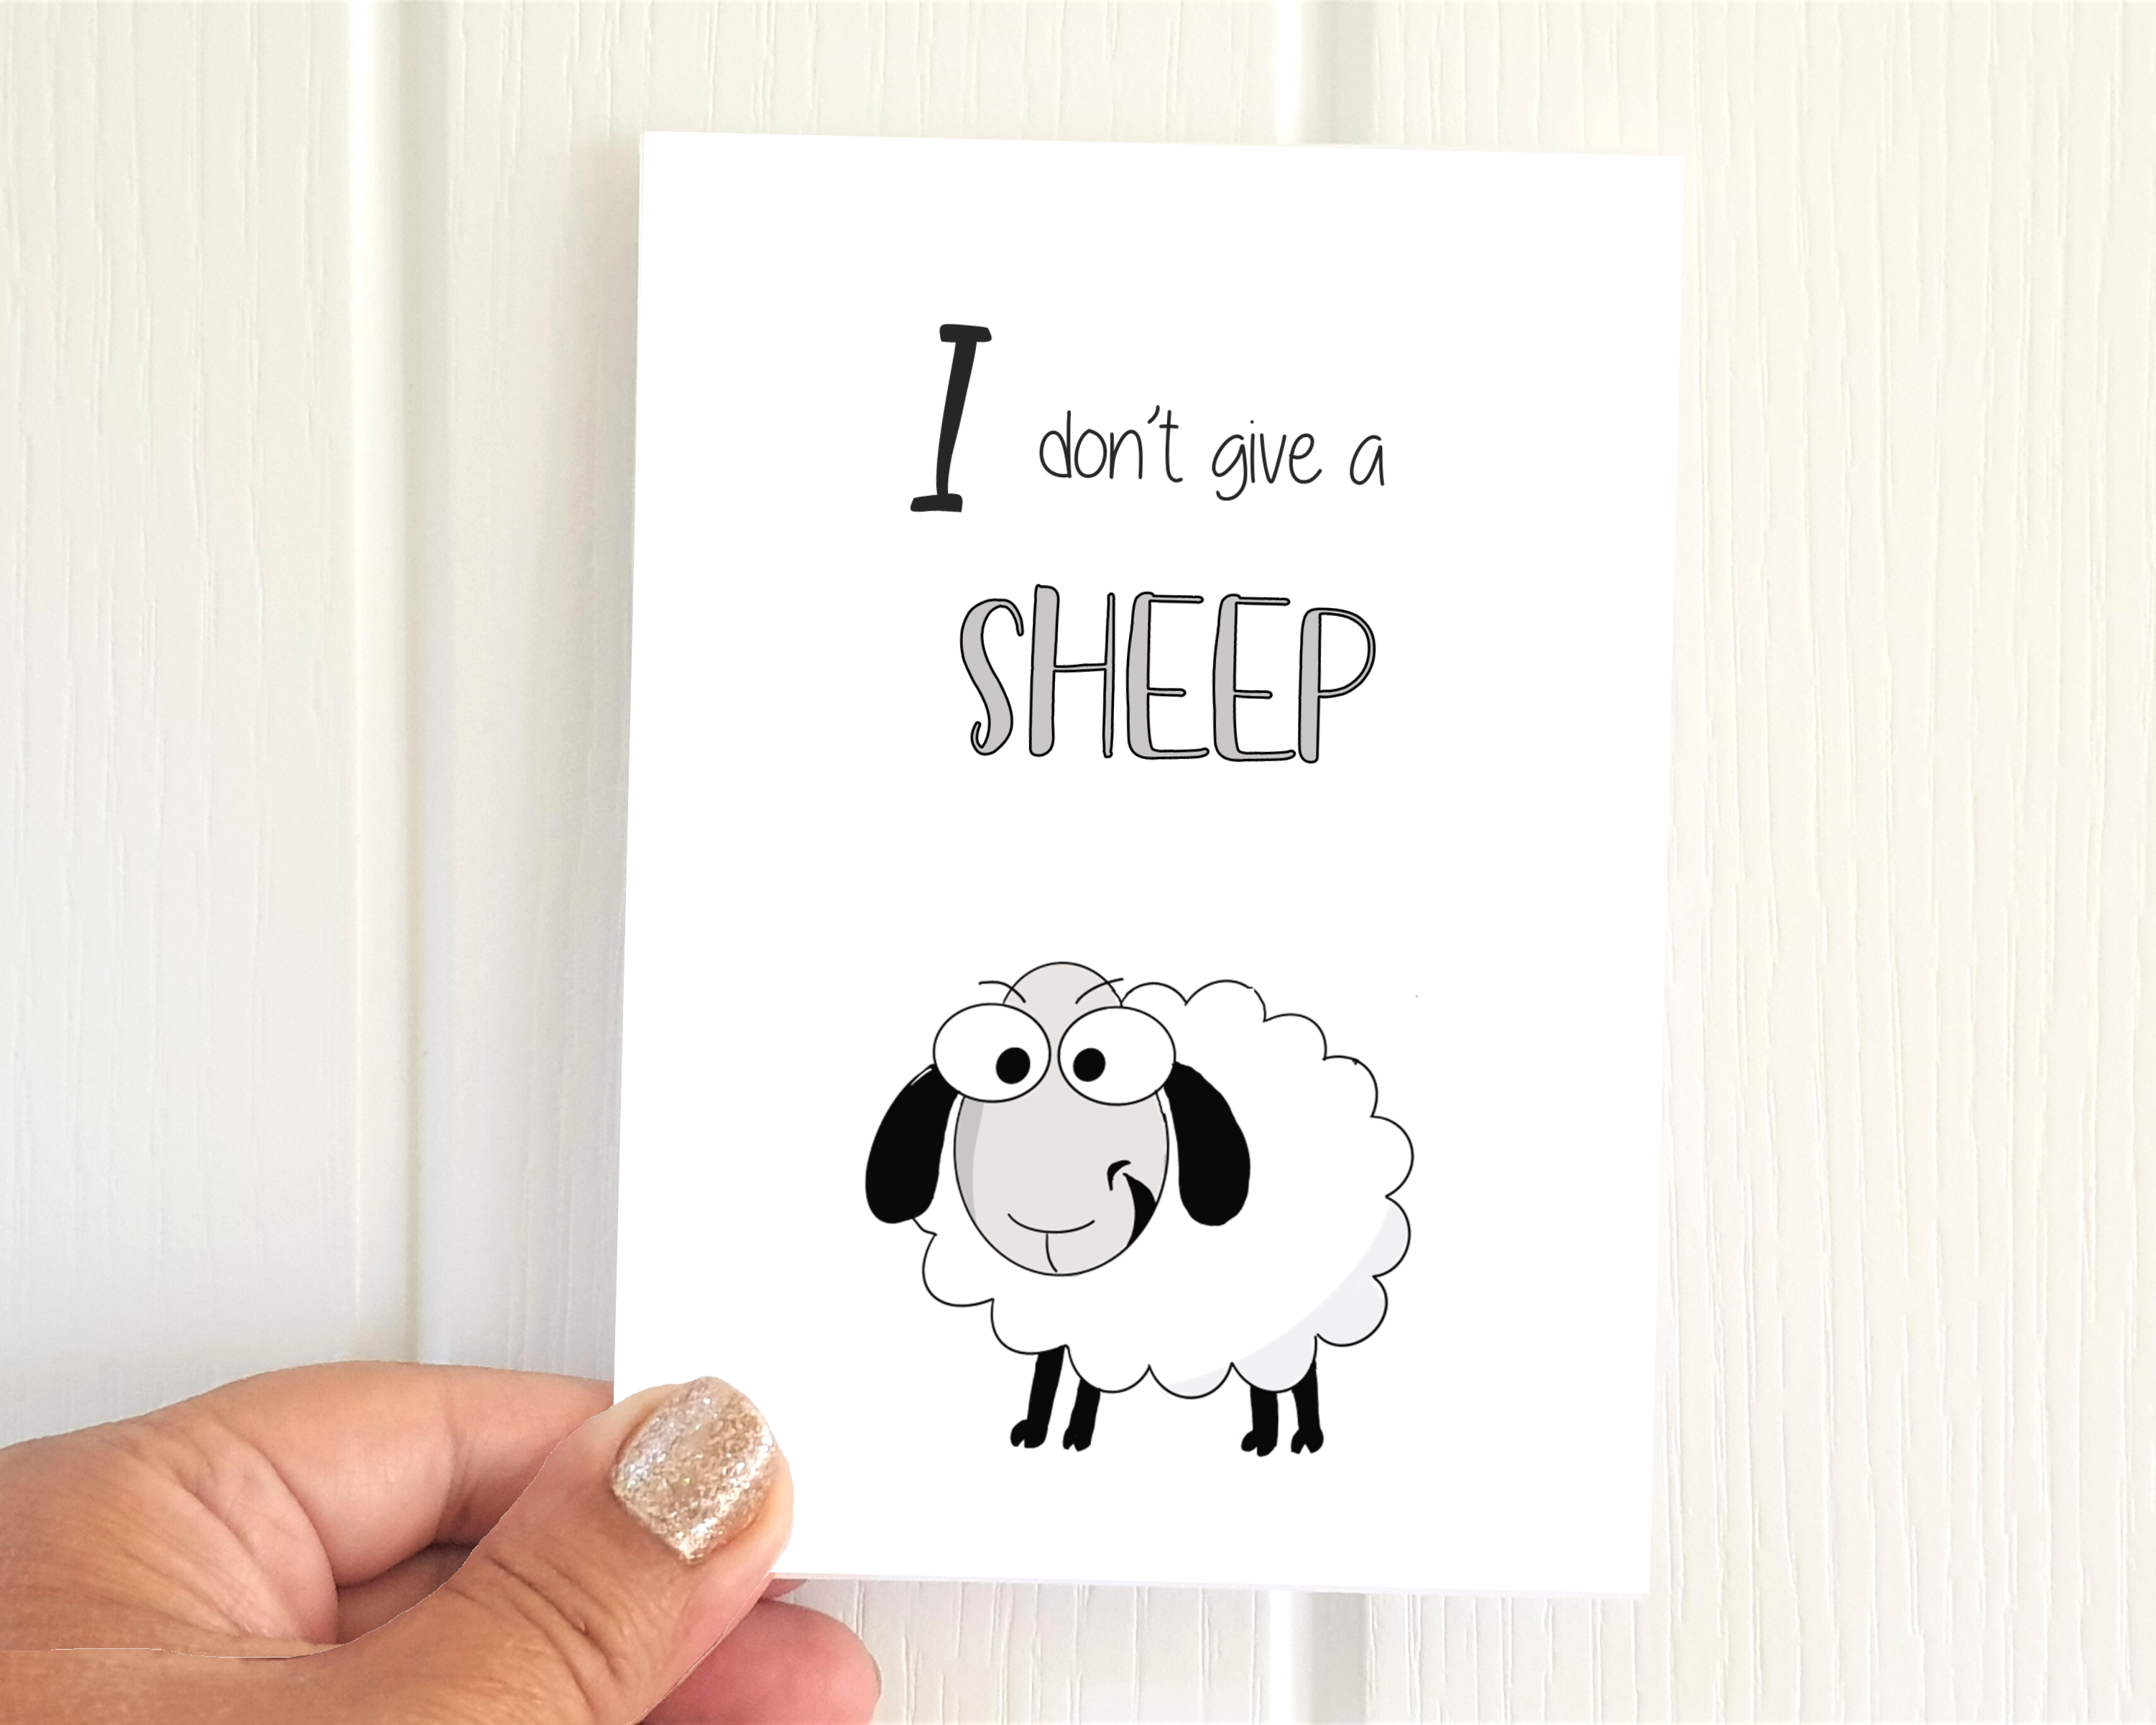 Cheeky sheep illustration A6 'I don't give a sheep!' pack of 6 Poppleberry funny rude animal postcards.